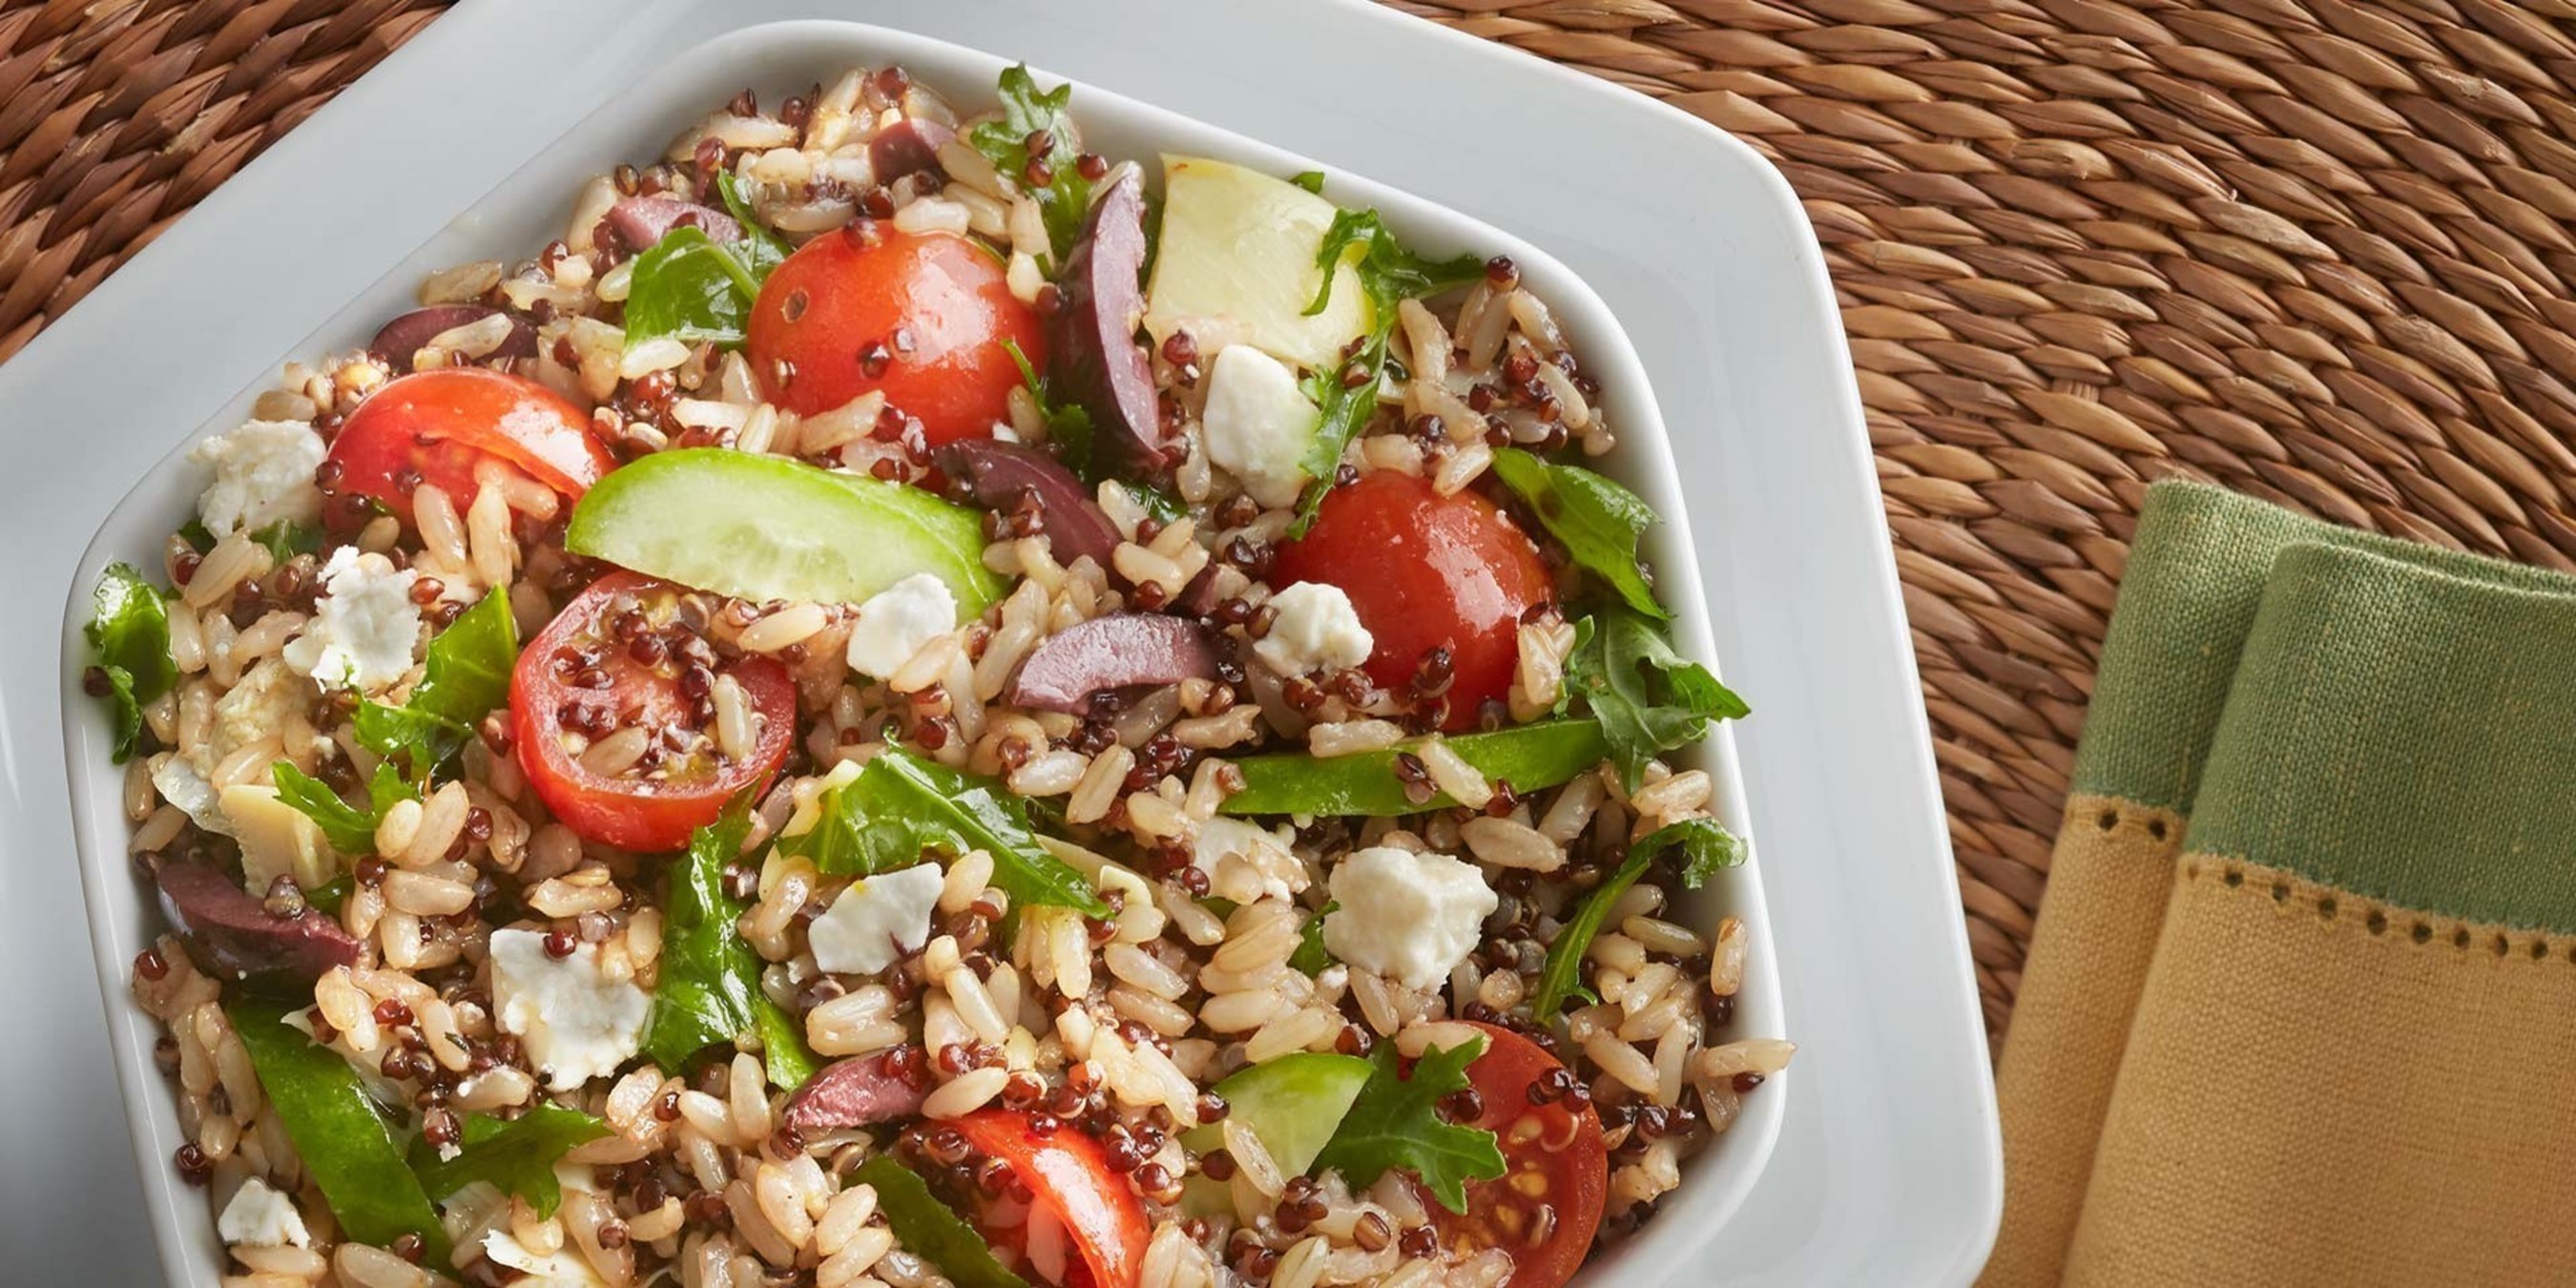 Celebrate National Rice Month with this delicious Mediterranean Salad made with the new Minute Ready to Serve Brown & Quinoa. Ready in just 60 seconds, it's the only product available of its kind in a single-serve cup similar to other Minute Ready to Serve Rice varieties with the added benefits of being a good source of fiber and gluten-free.